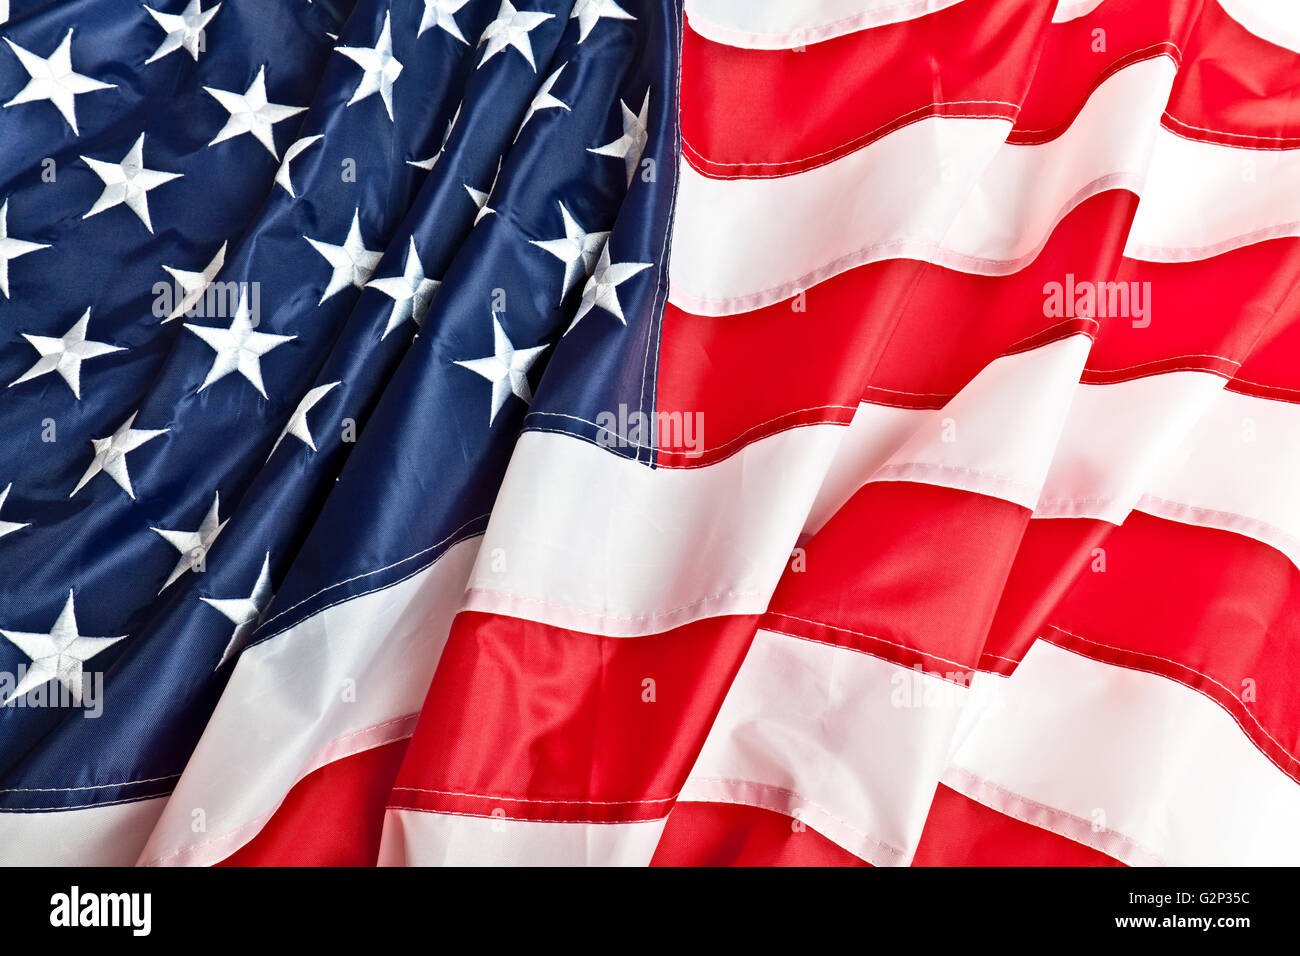 real fabric old glory flag Stock Photo